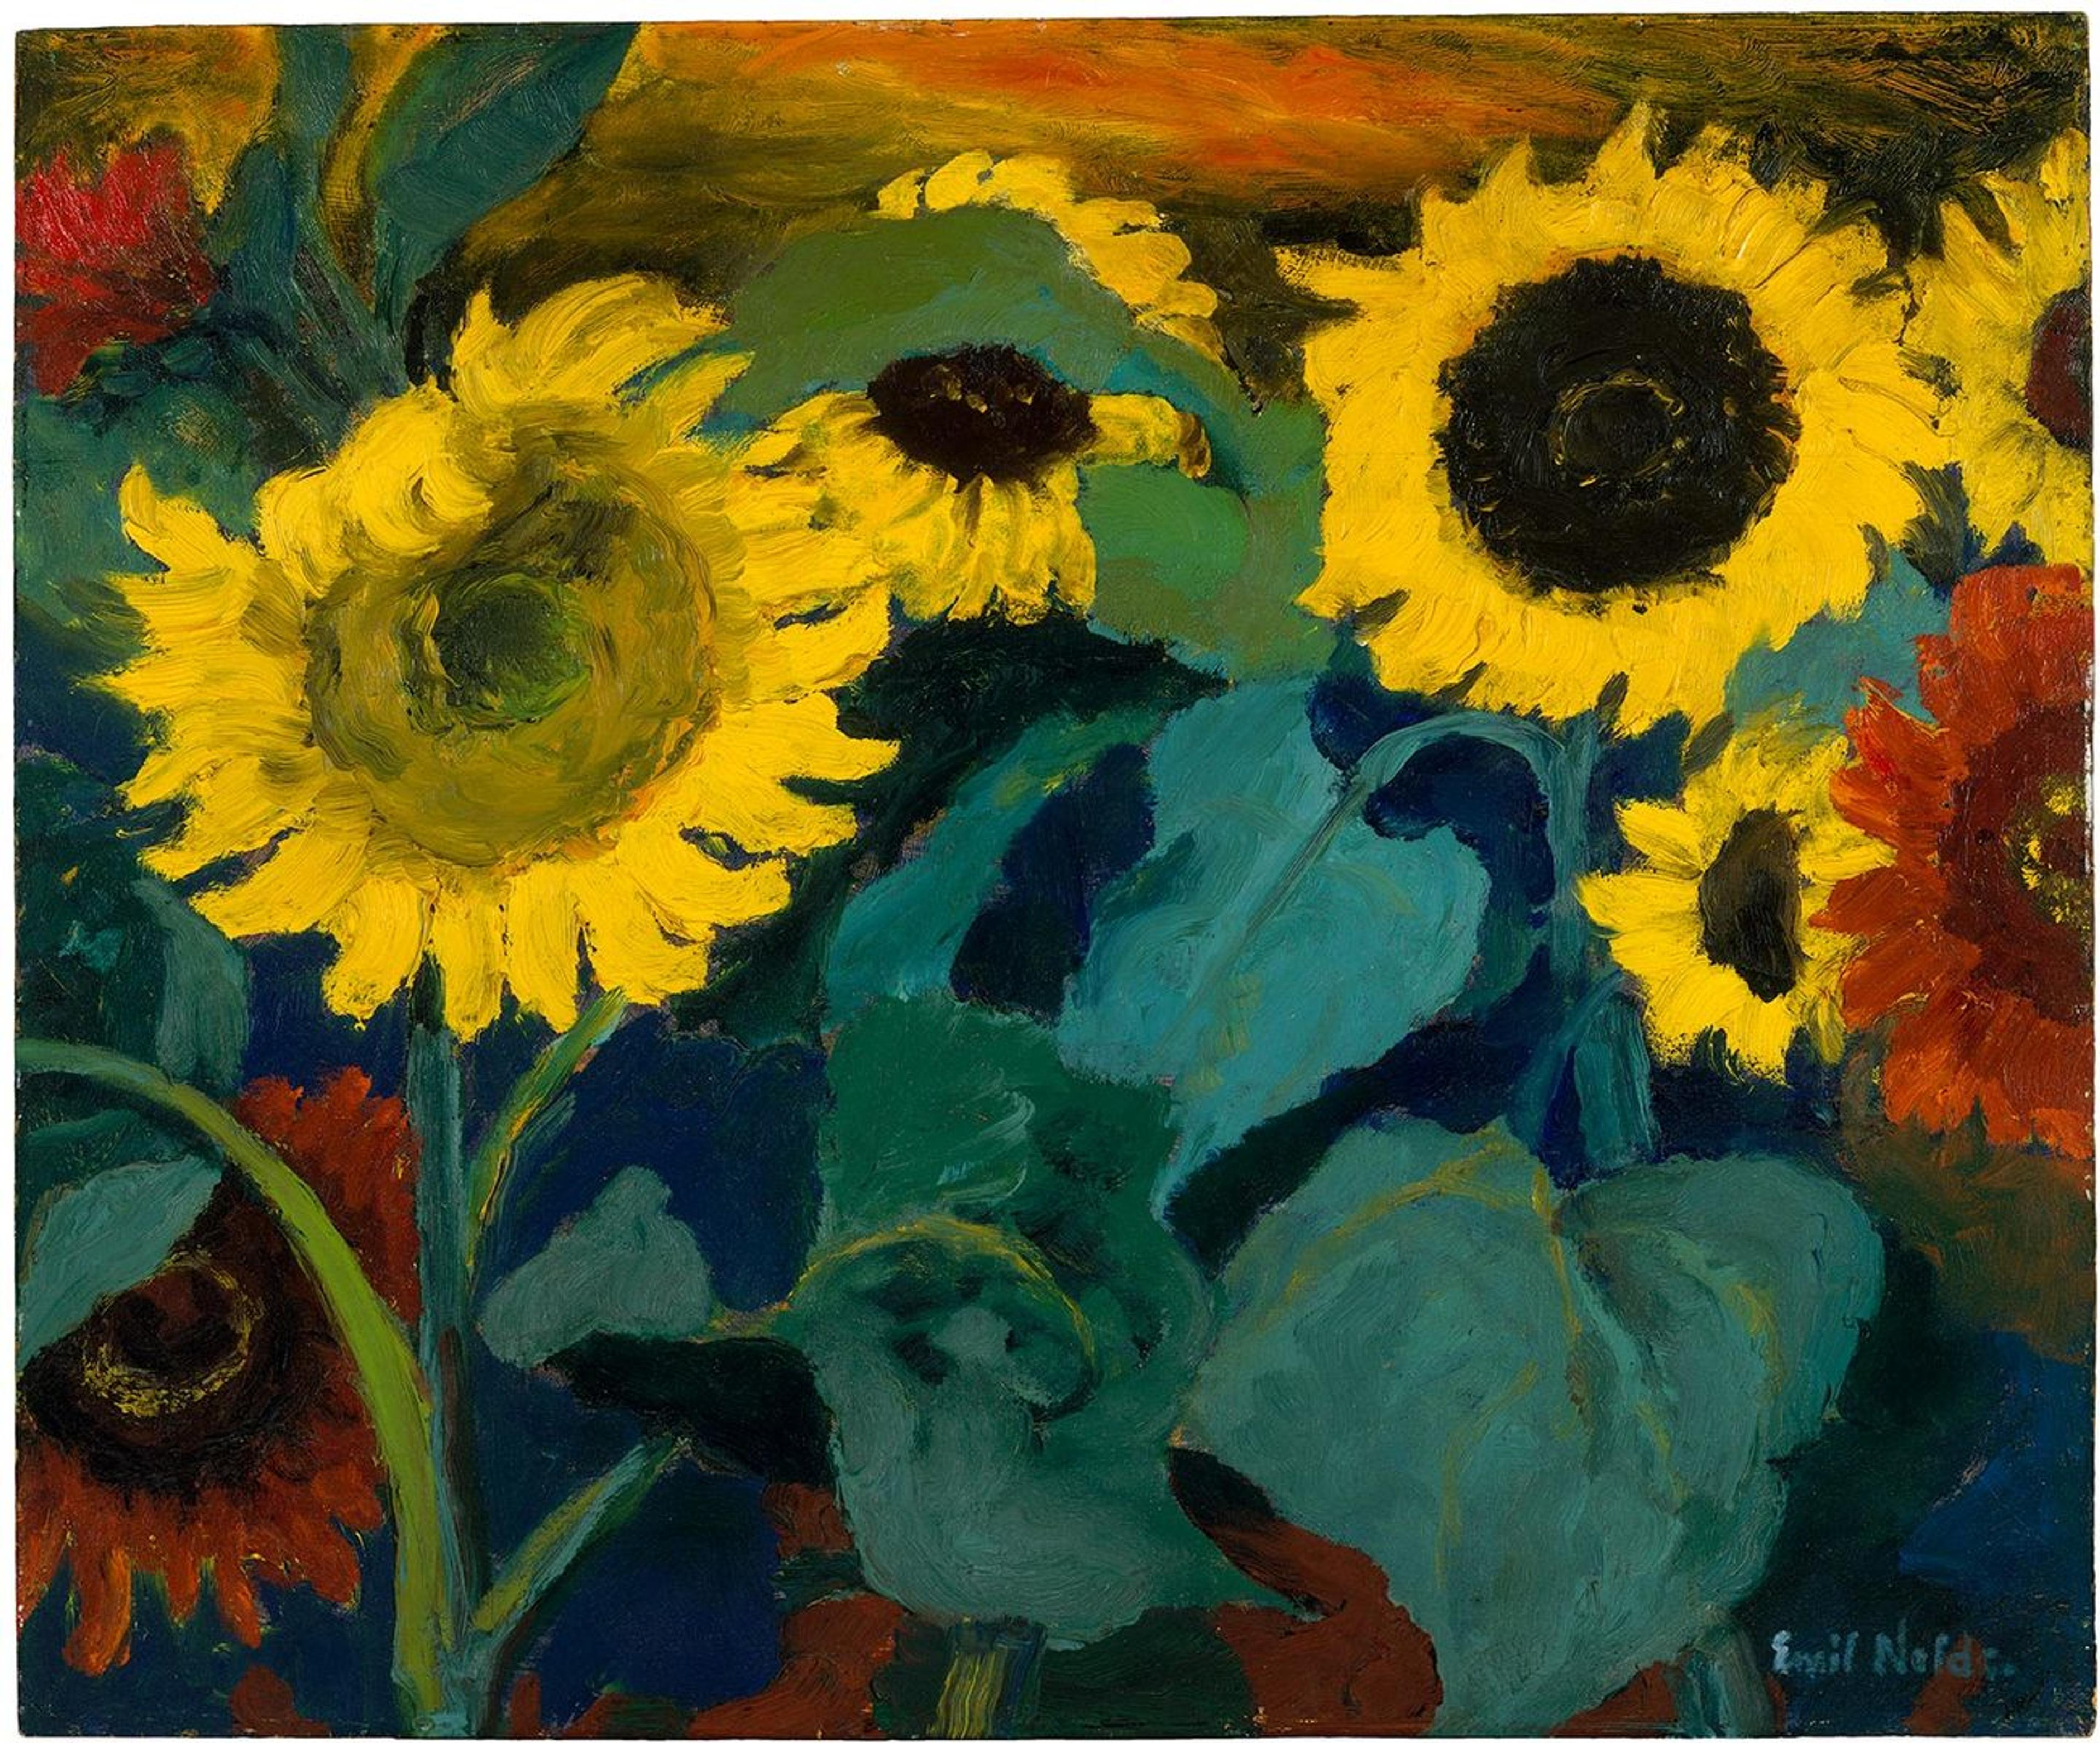 Painting of big sunflowers with big green leaves by Emil Nolde